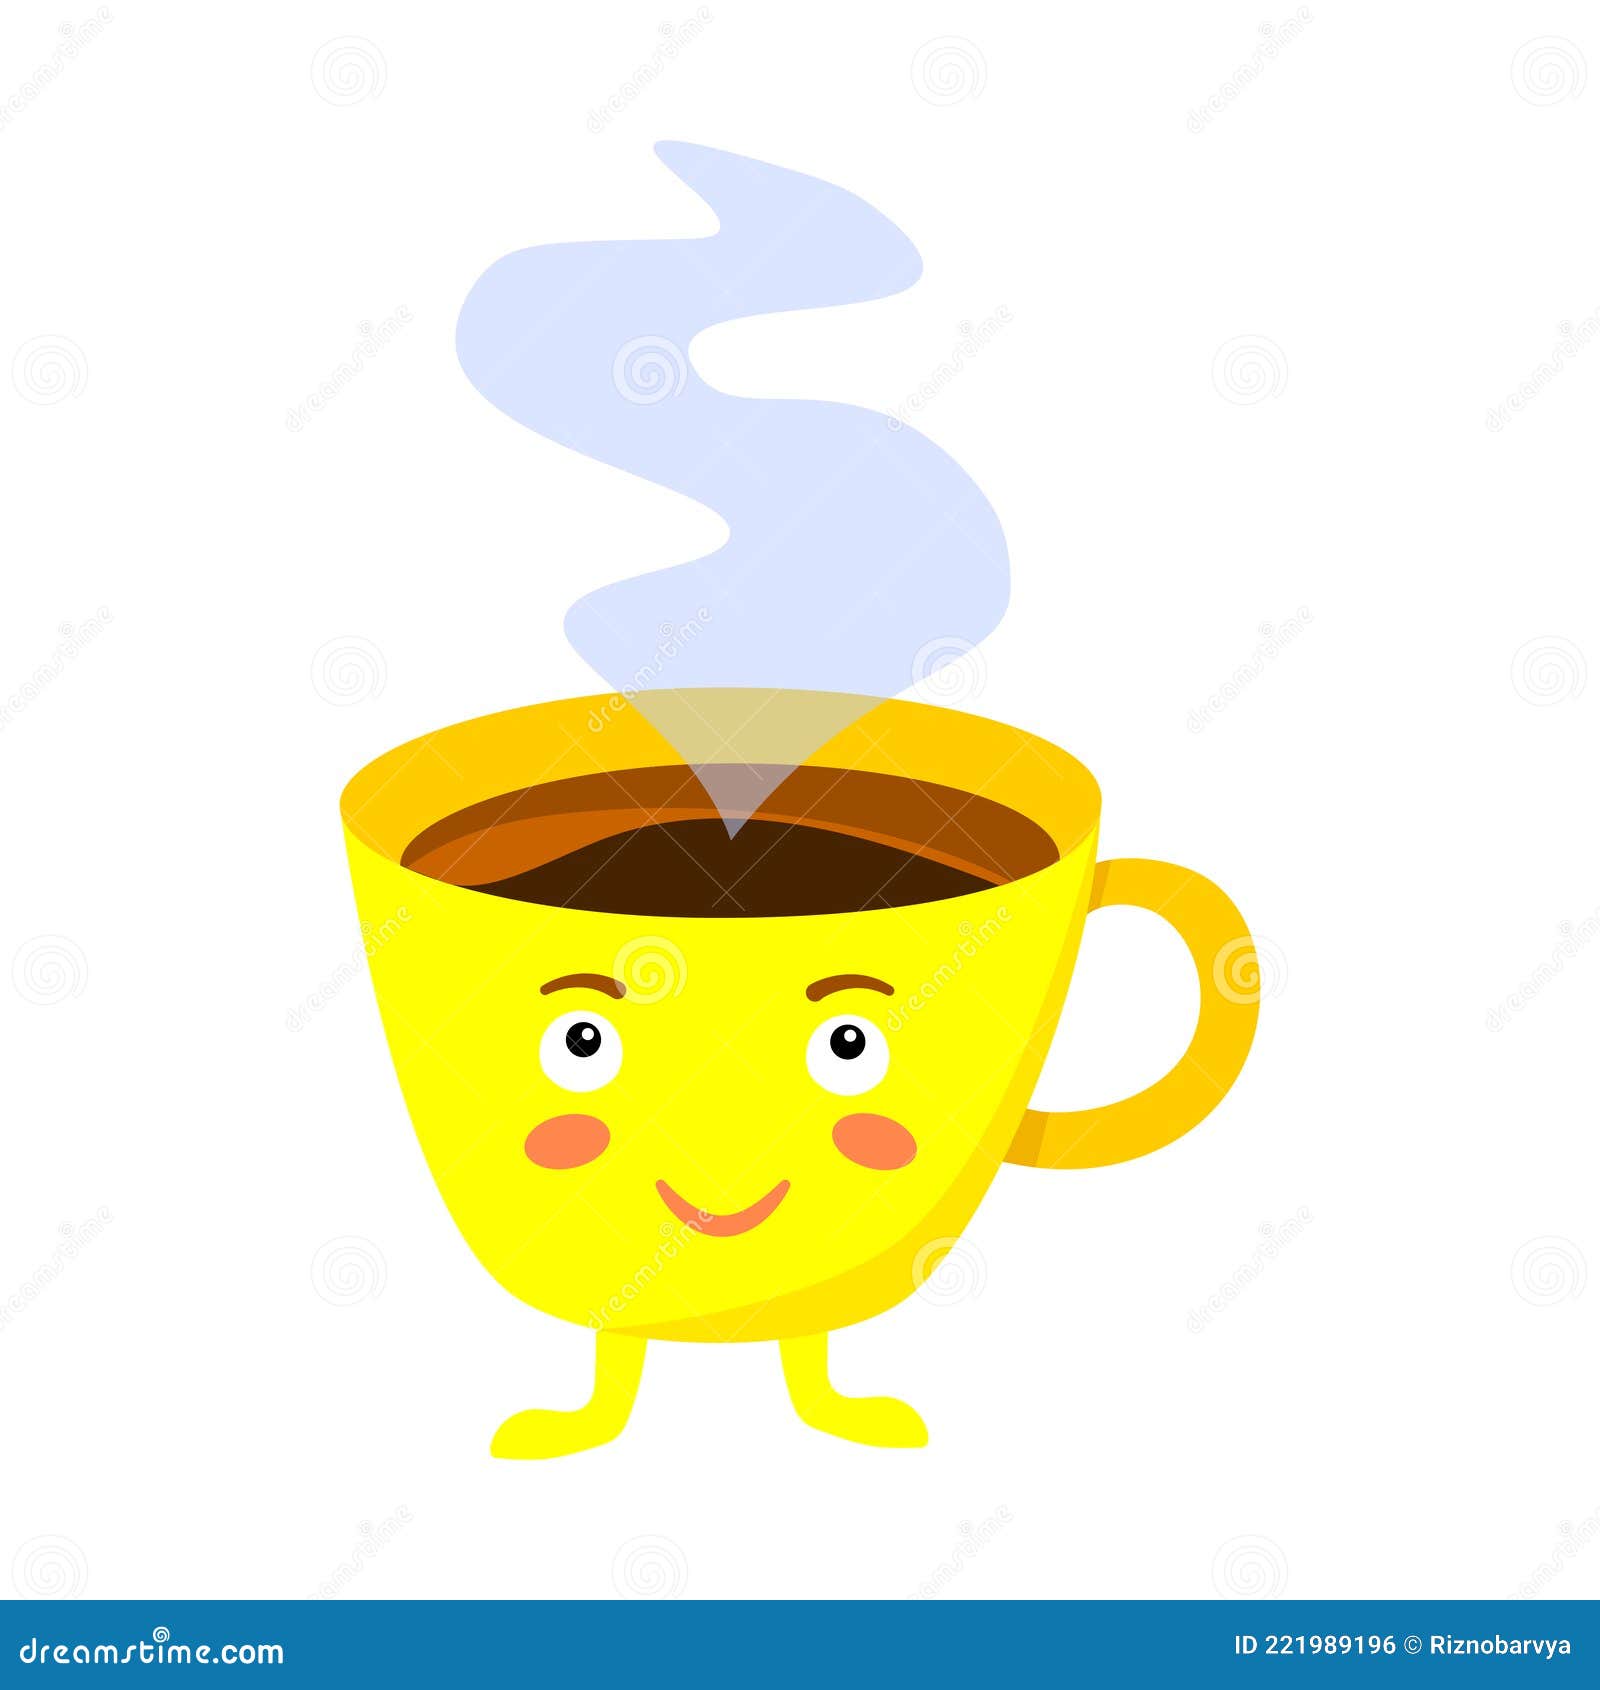 Smiling Cartoon Cup with Coffee, Tea. Yellow Cup, Character, Good Morning  Concept. Stock Vector - Illustration of cafe, delicious: 221989196